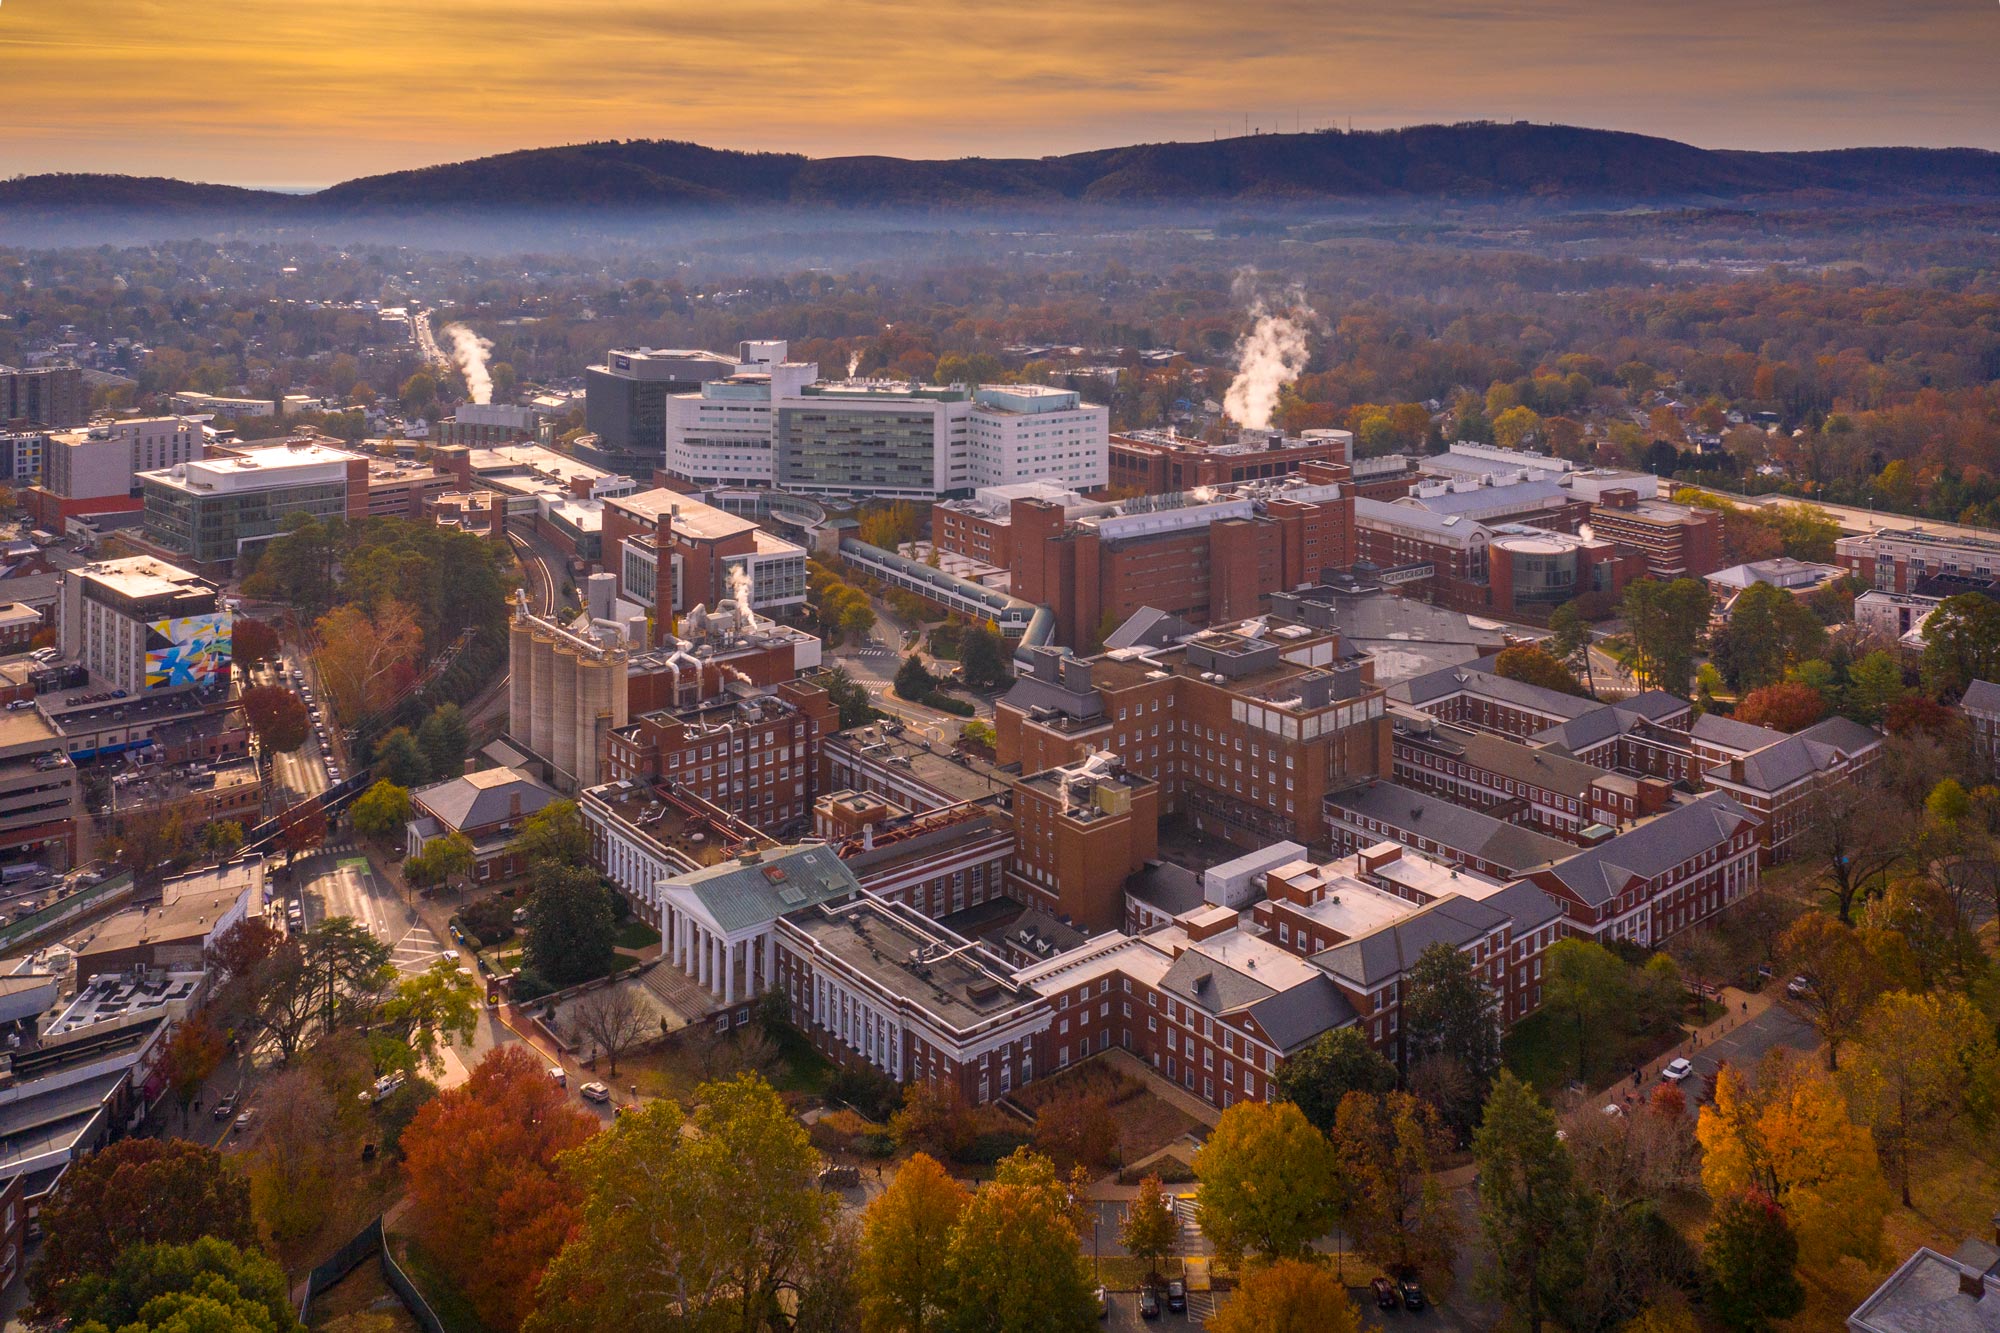 Arial view of the UVA Health Center Buildings with an orange and yellow sunset just above the blue ridge mountains